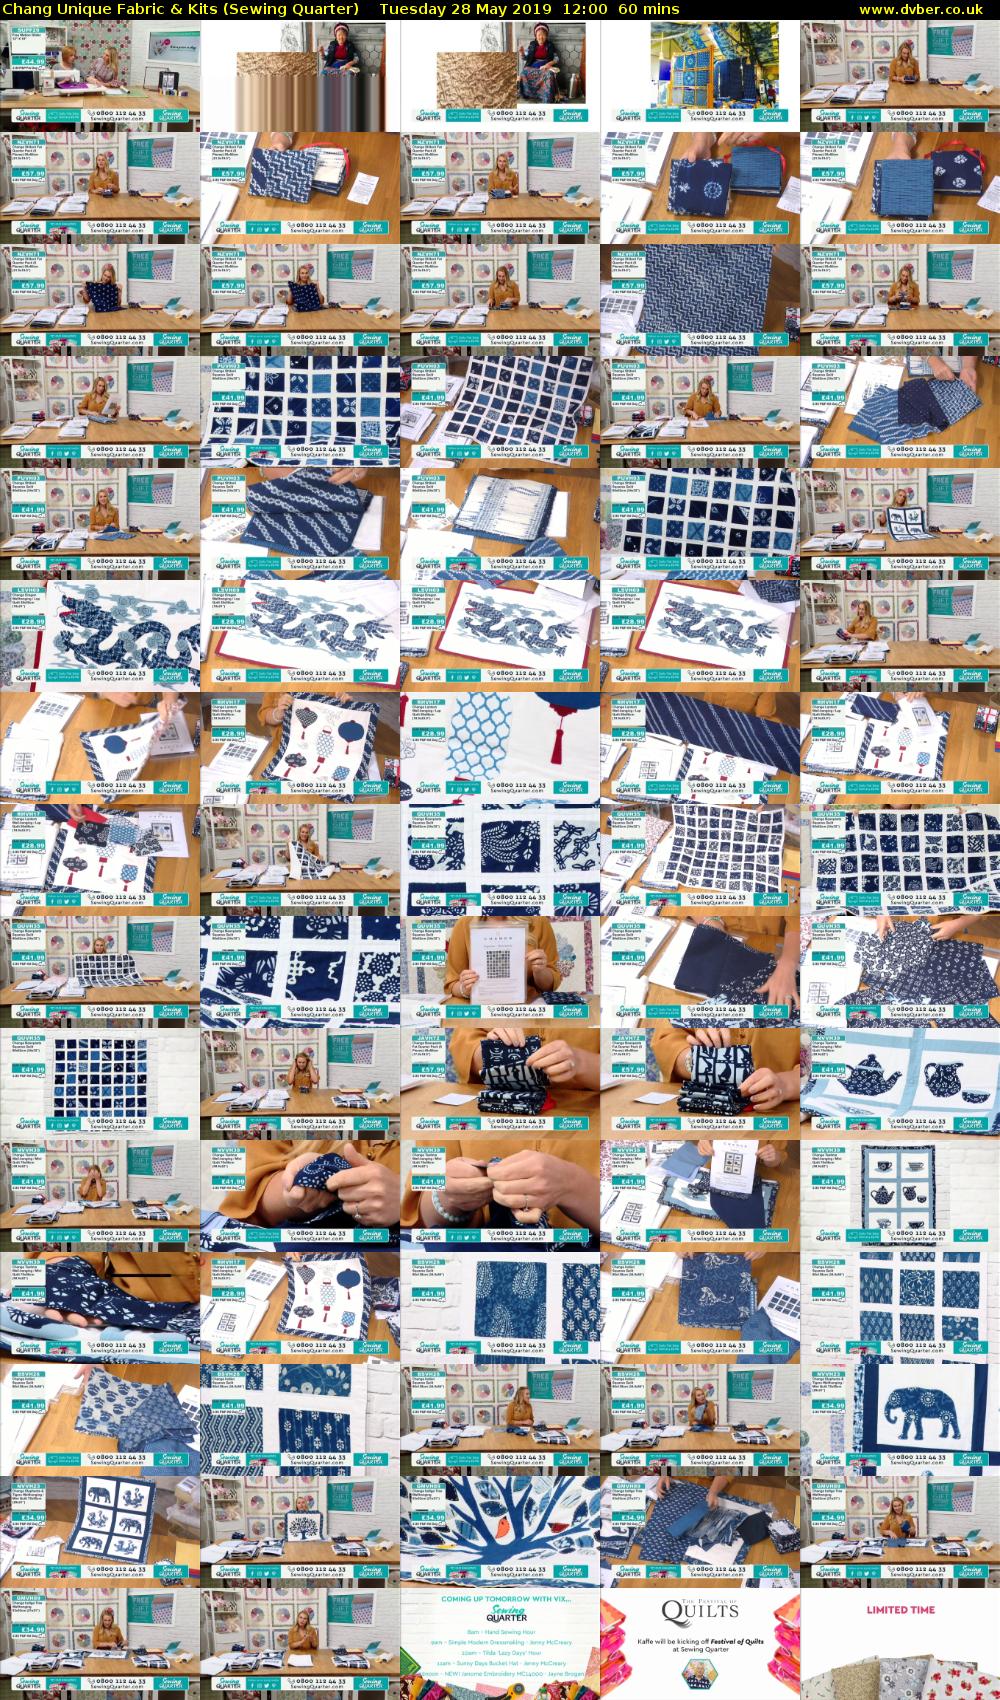 Chang Unique Fabric & Kits (Sewing Quarter) Tuesday 28 May 2019 12:00 - 13:00